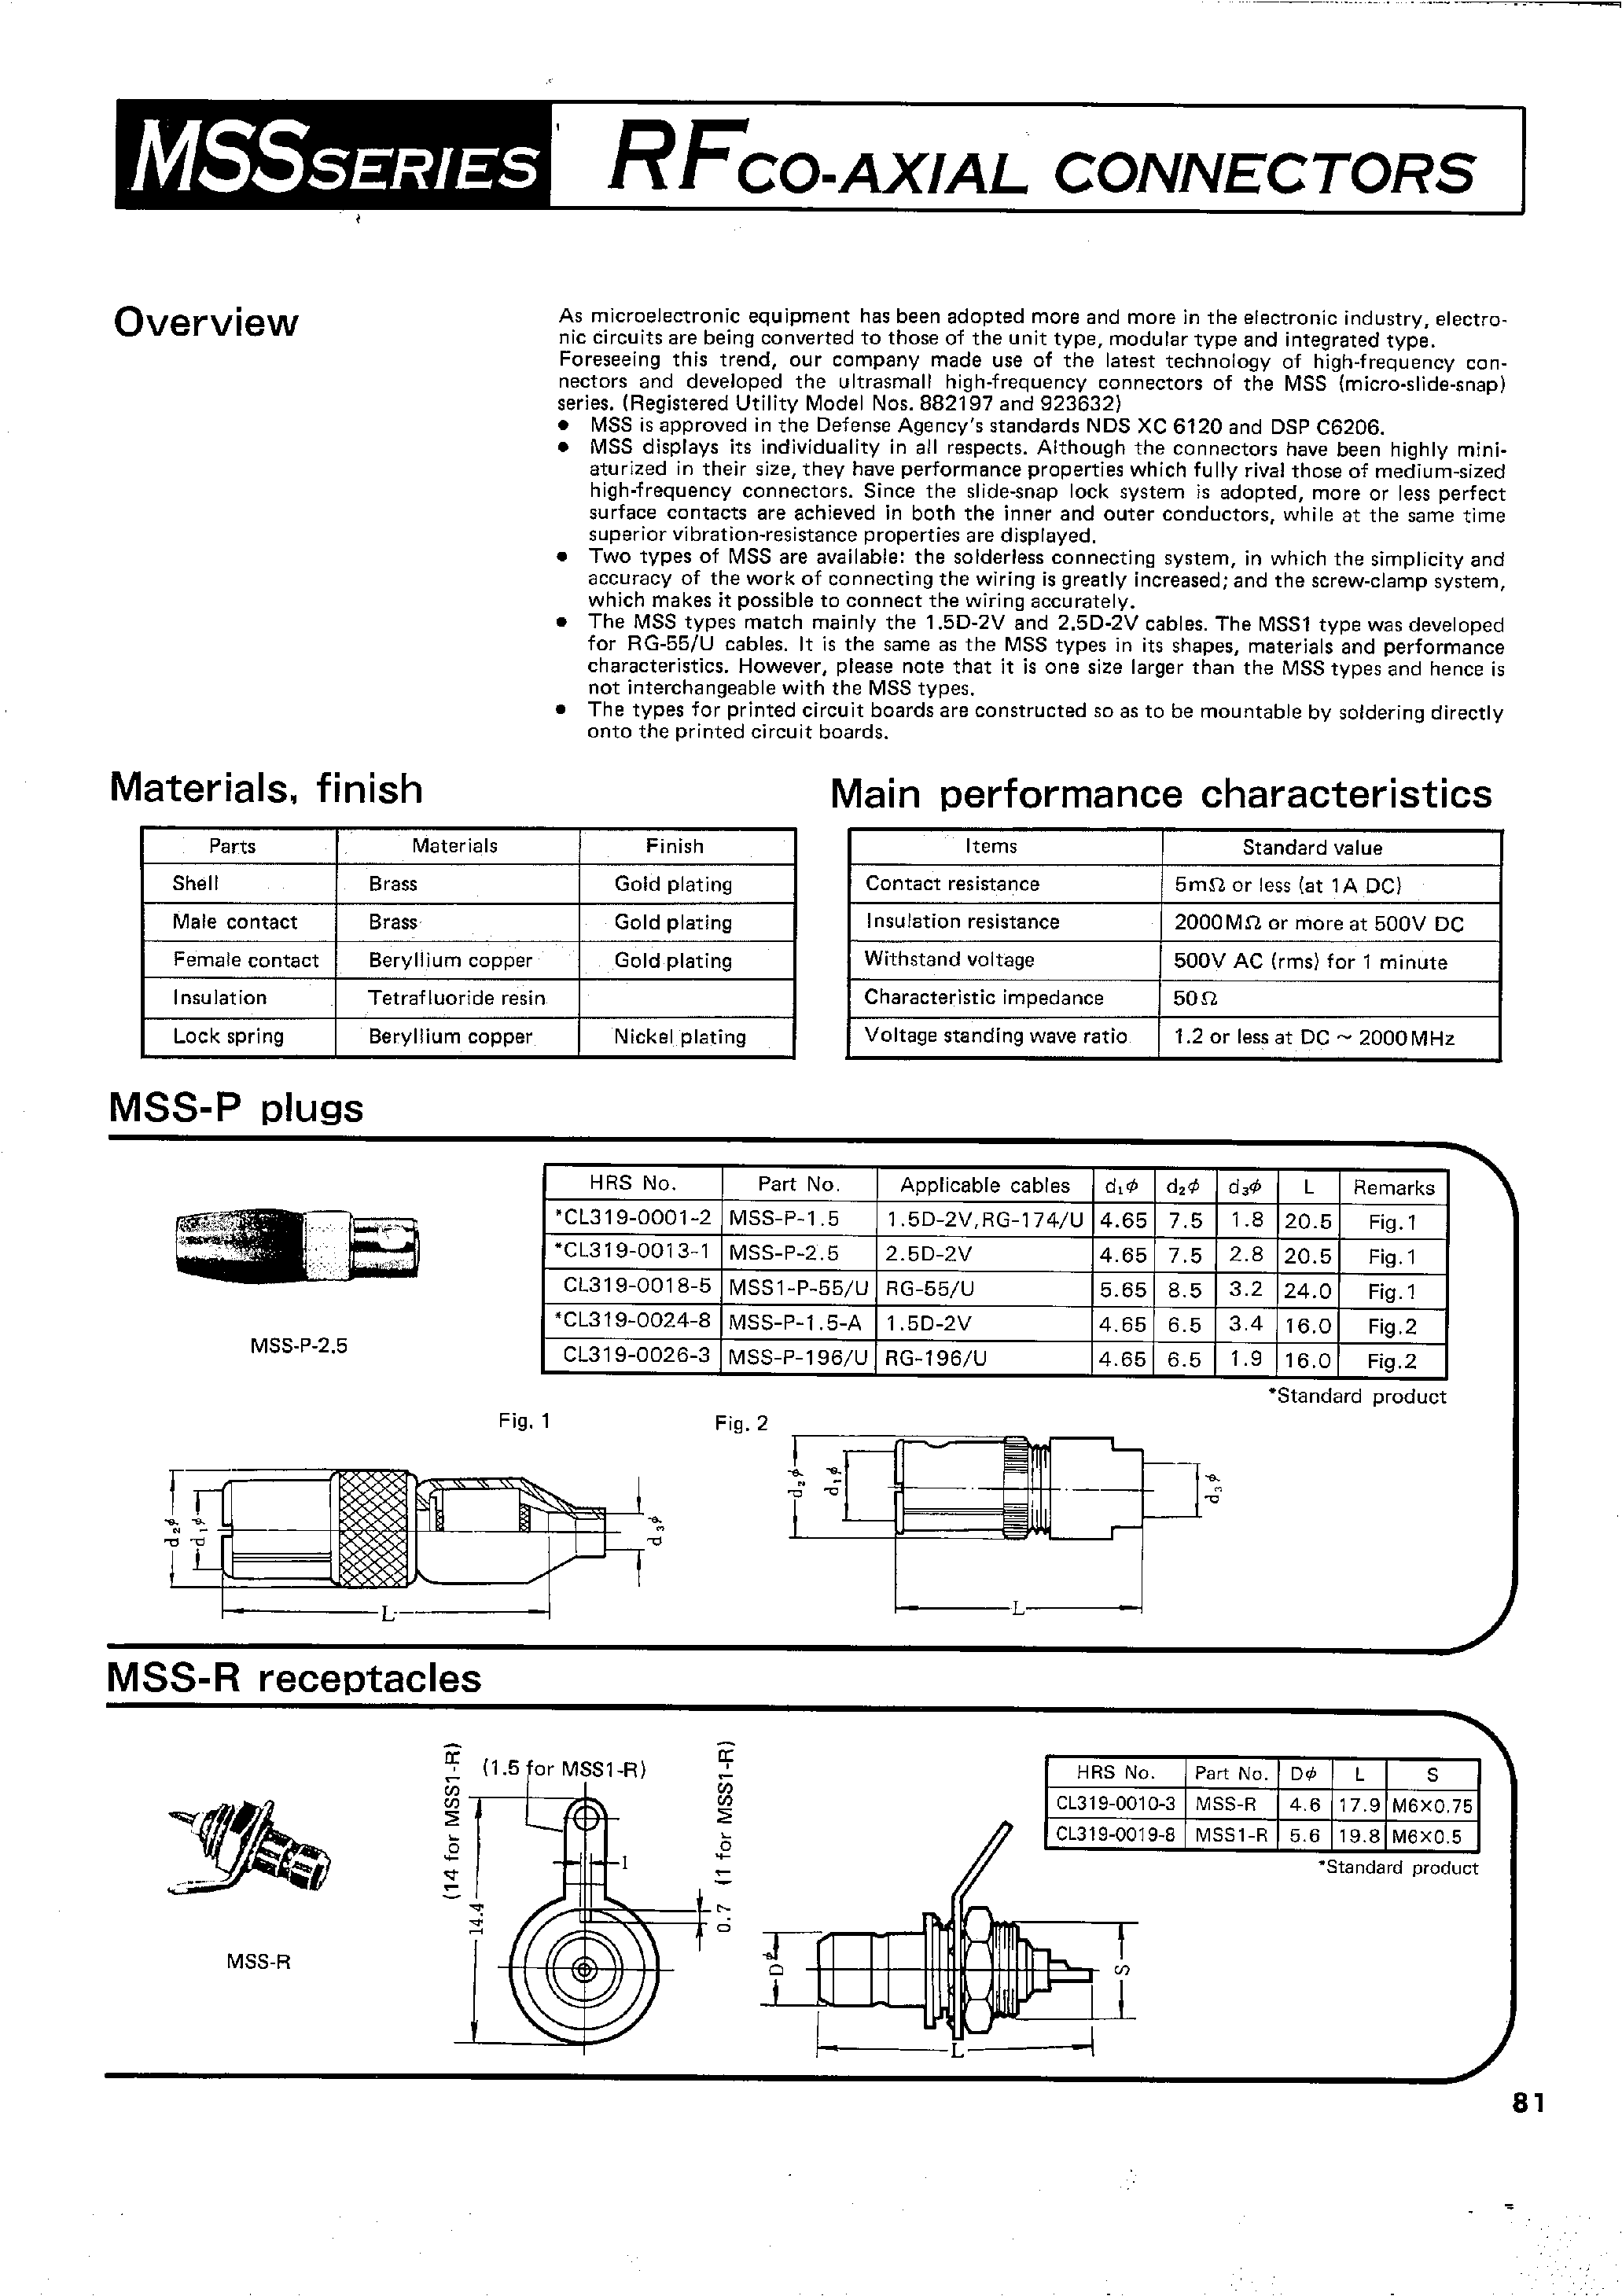 Datasheet CL319-0011-6 - RFCO-AXIAL CONNECTORS page 1